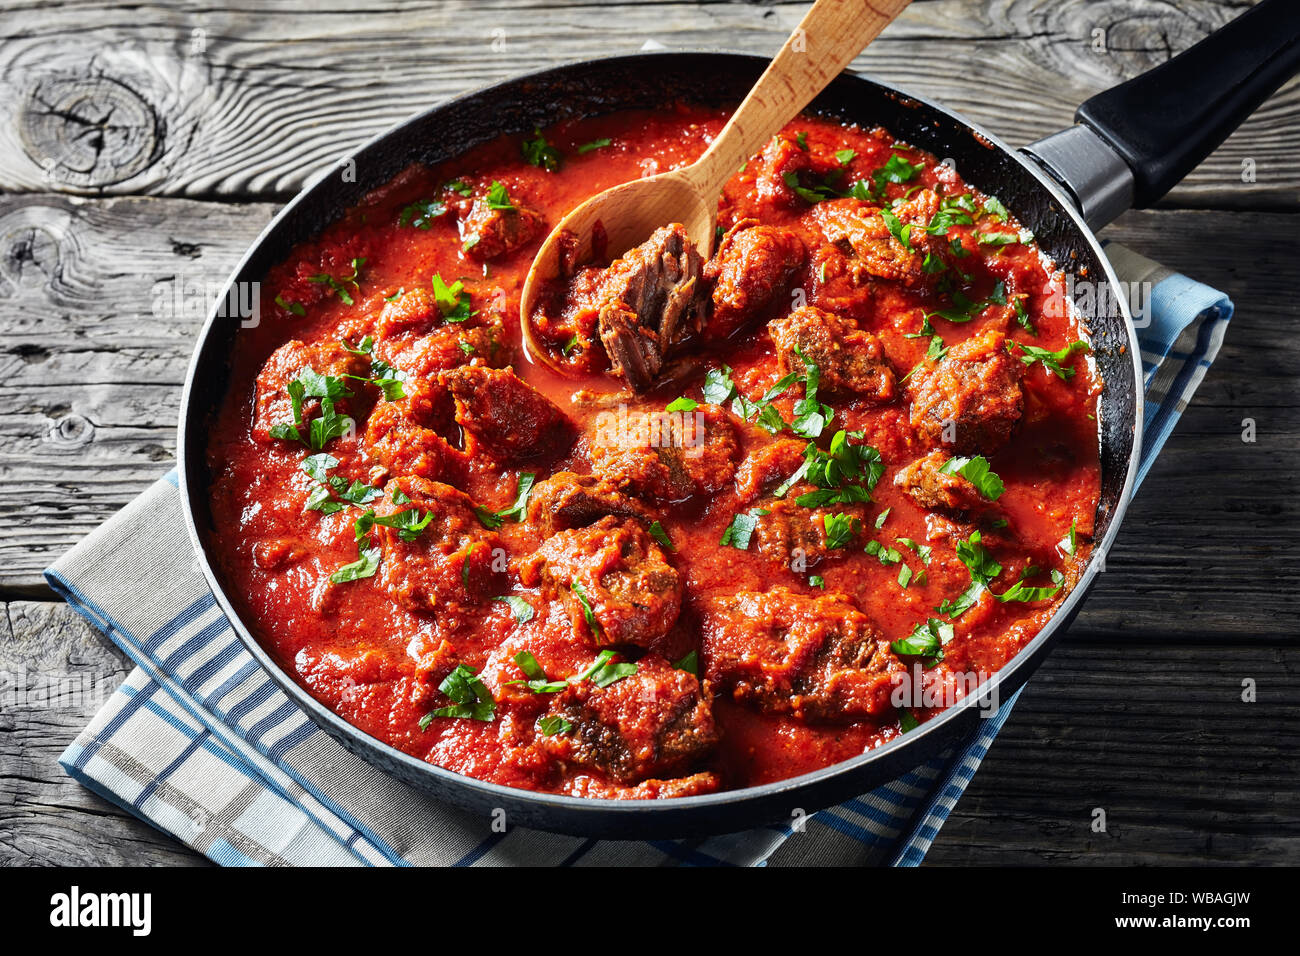 close-up of African Beef Stew in tomato sauce with spices and herbs in a skillet on an old wooden table, horizontal view from above Stock Photo